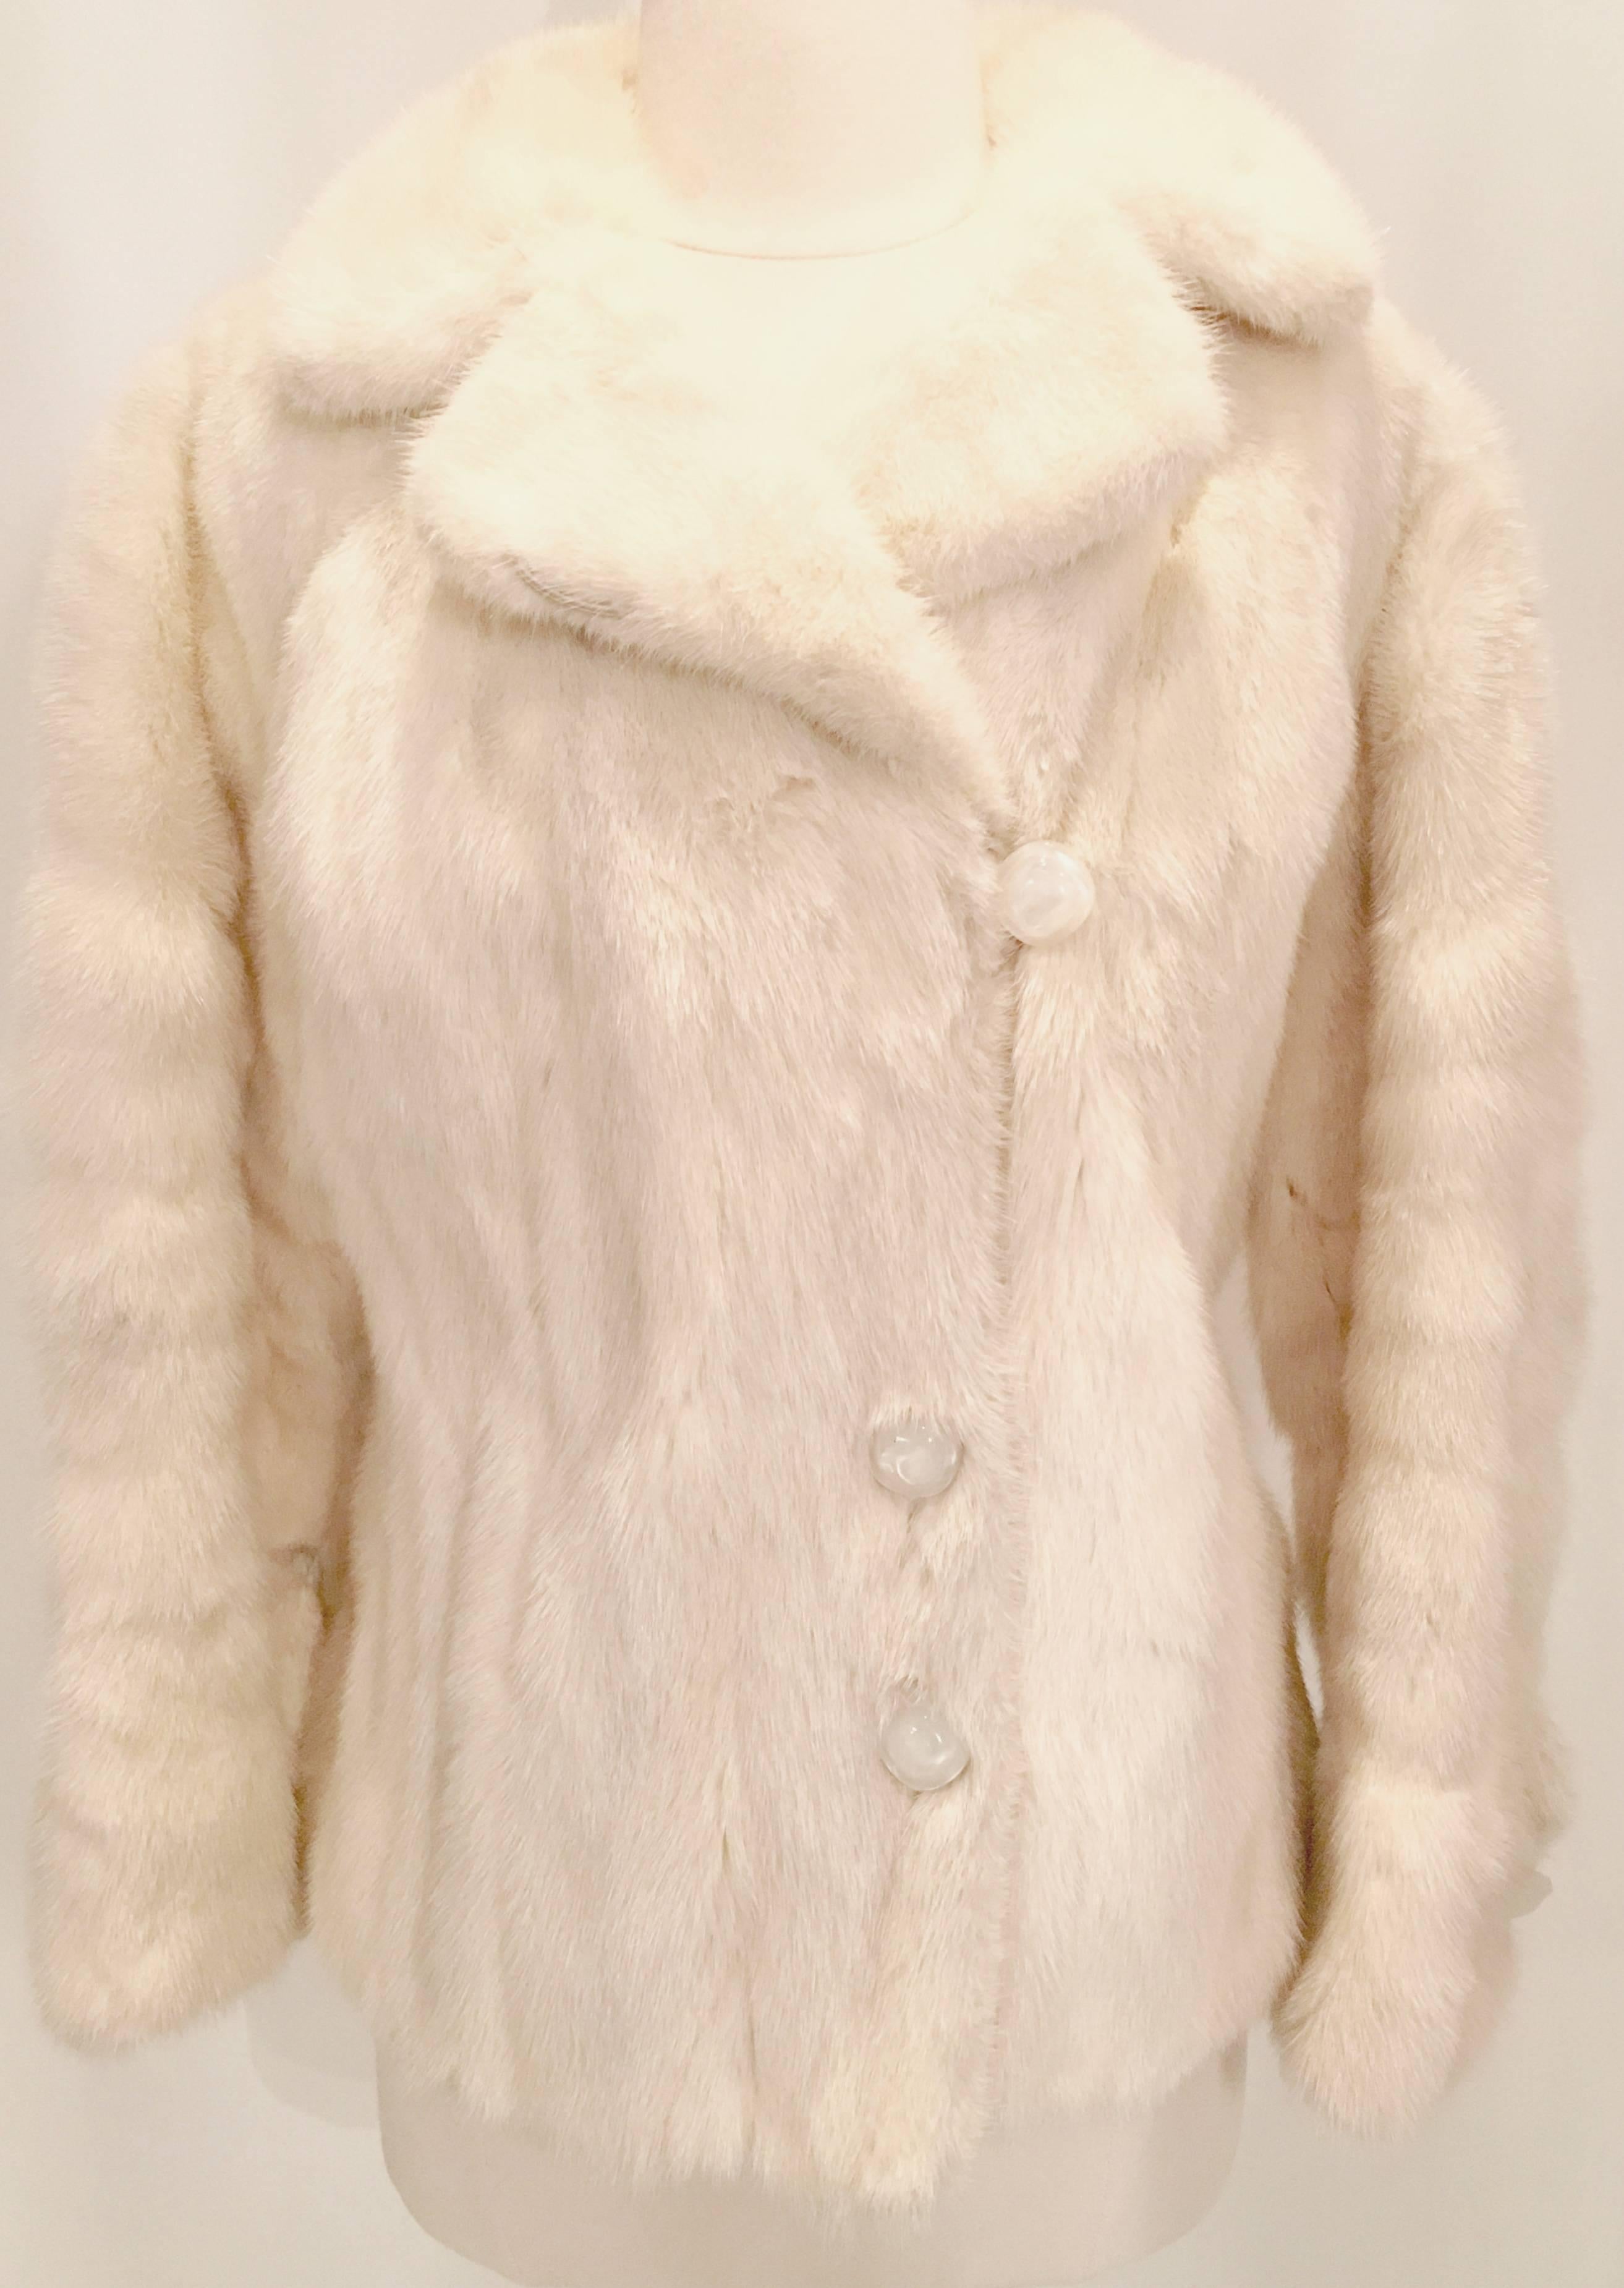 1970'S designer Oleg Cassini winter white mink fur jacket with "bling" details. Classic pea coat style with added pizzazz, bell sleeves at the wrist, peter pan style collar, milky white marbleized square rounded Lucite buttons and a built